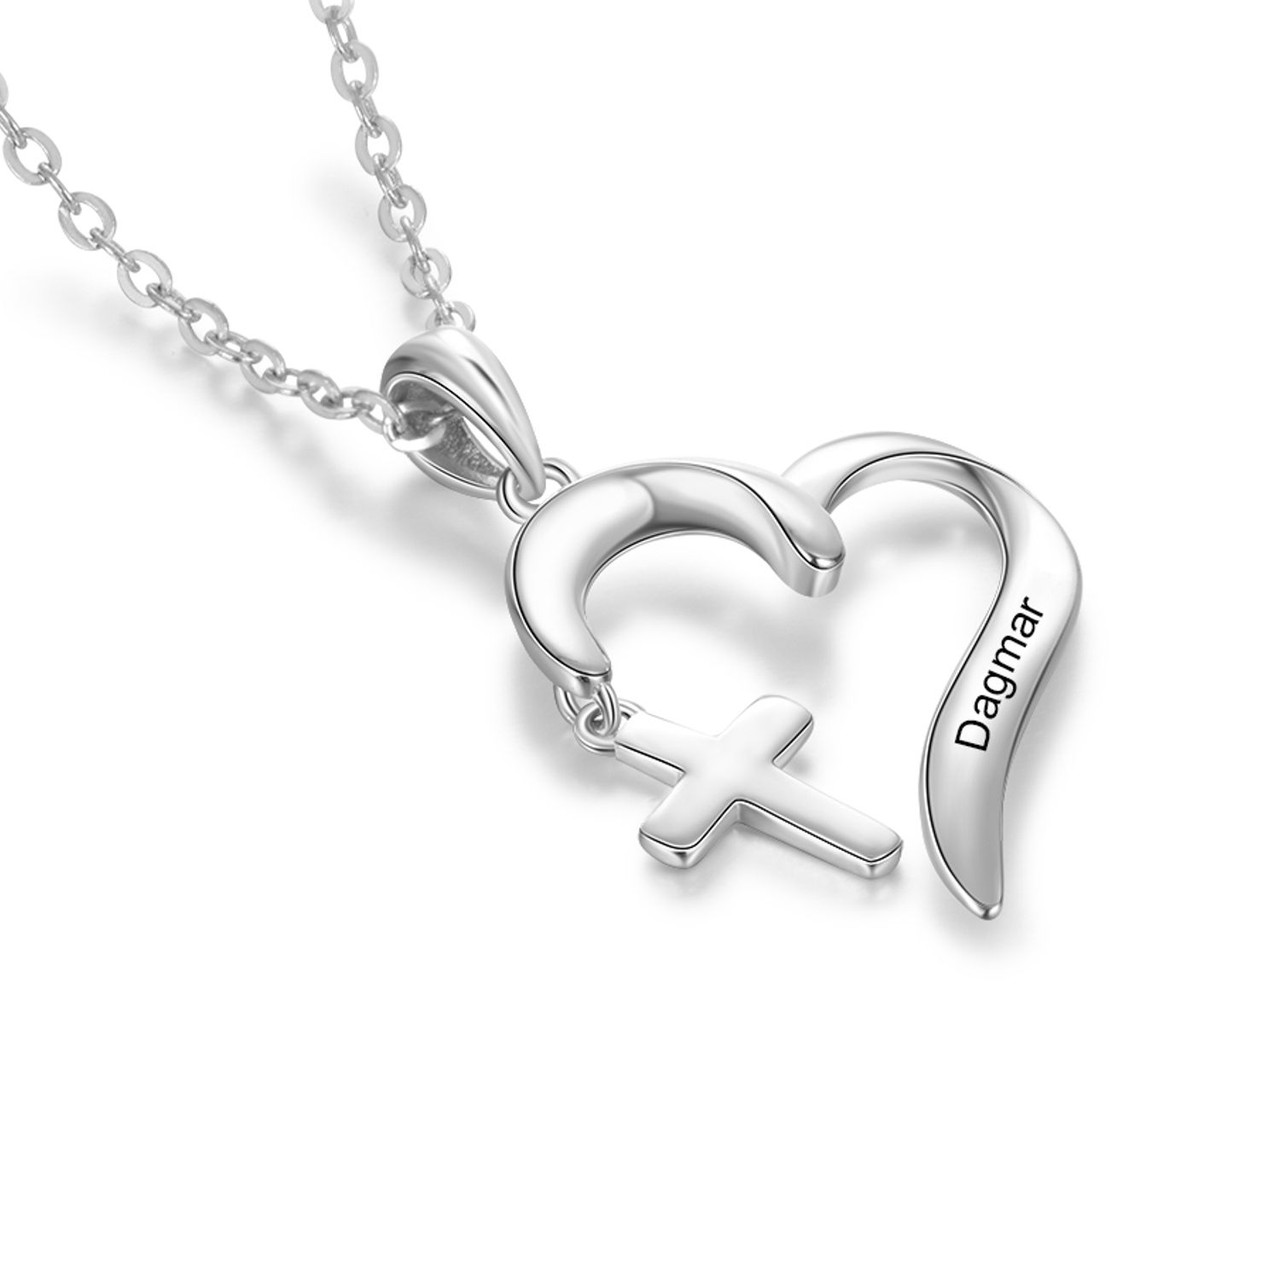 BOSS SS WITH STAMPED BOSS MONOGRAM HEART - Necklace - silver coloured/silver-coloured  